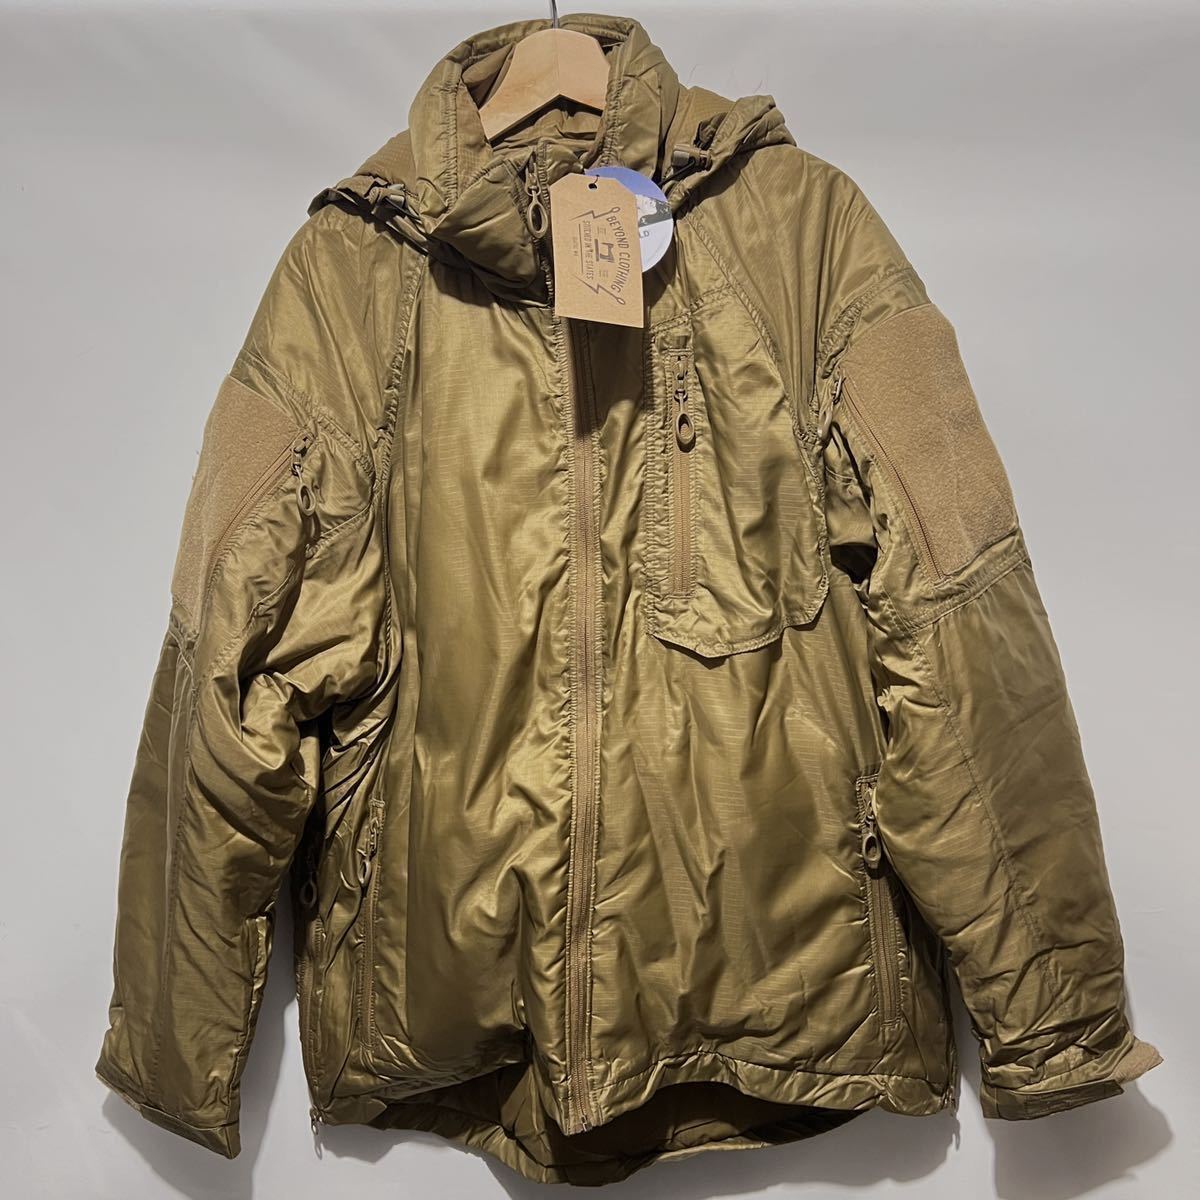 Beyond Clothing A7 AXIOS COLD WEATHER JACKET M コヨーテ USA製 米軍 